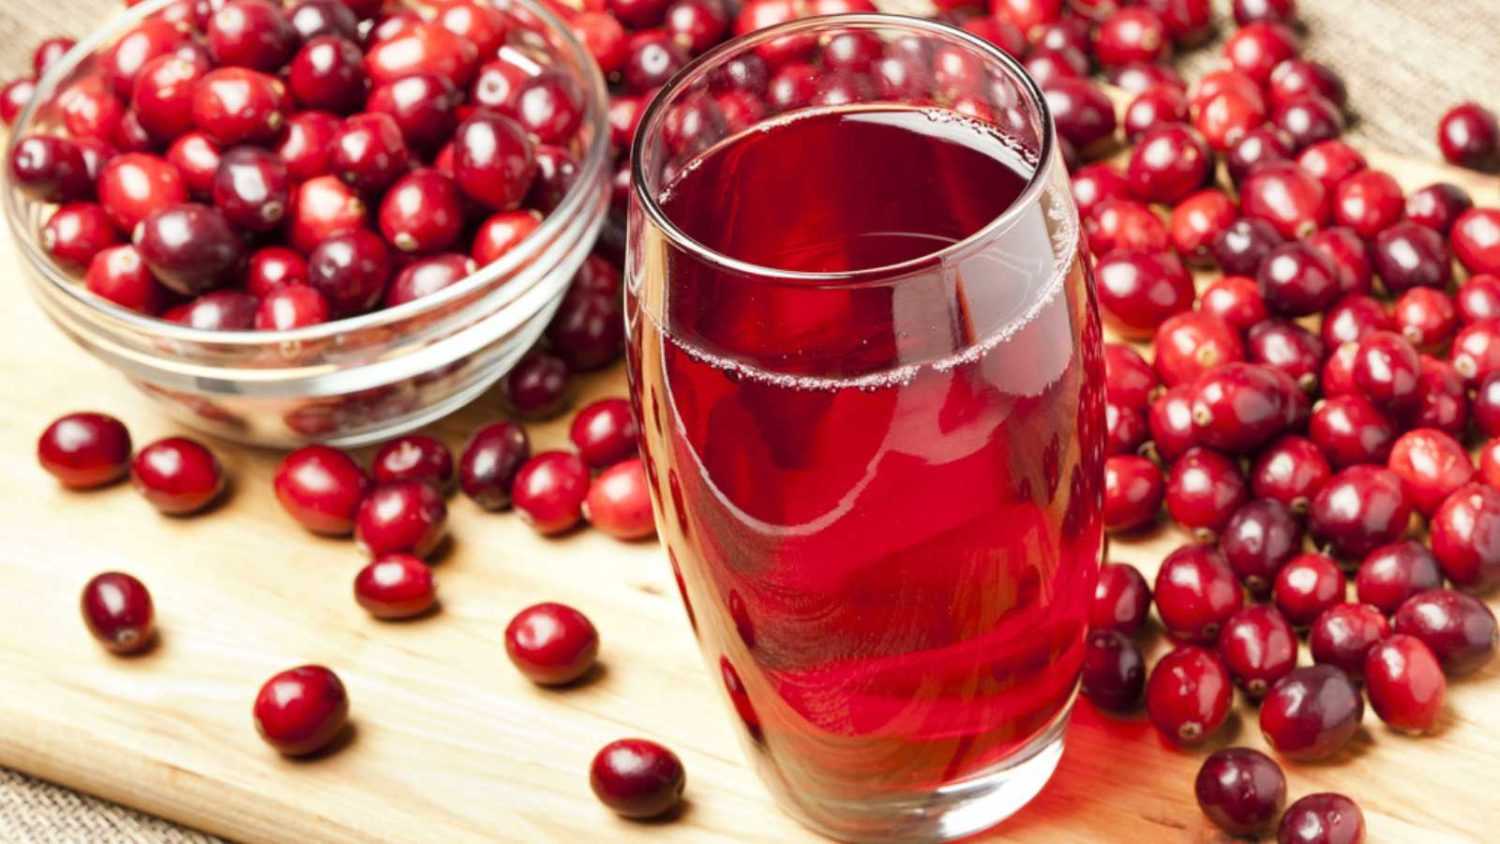 Fresh Organic Cranberry Juice against a background